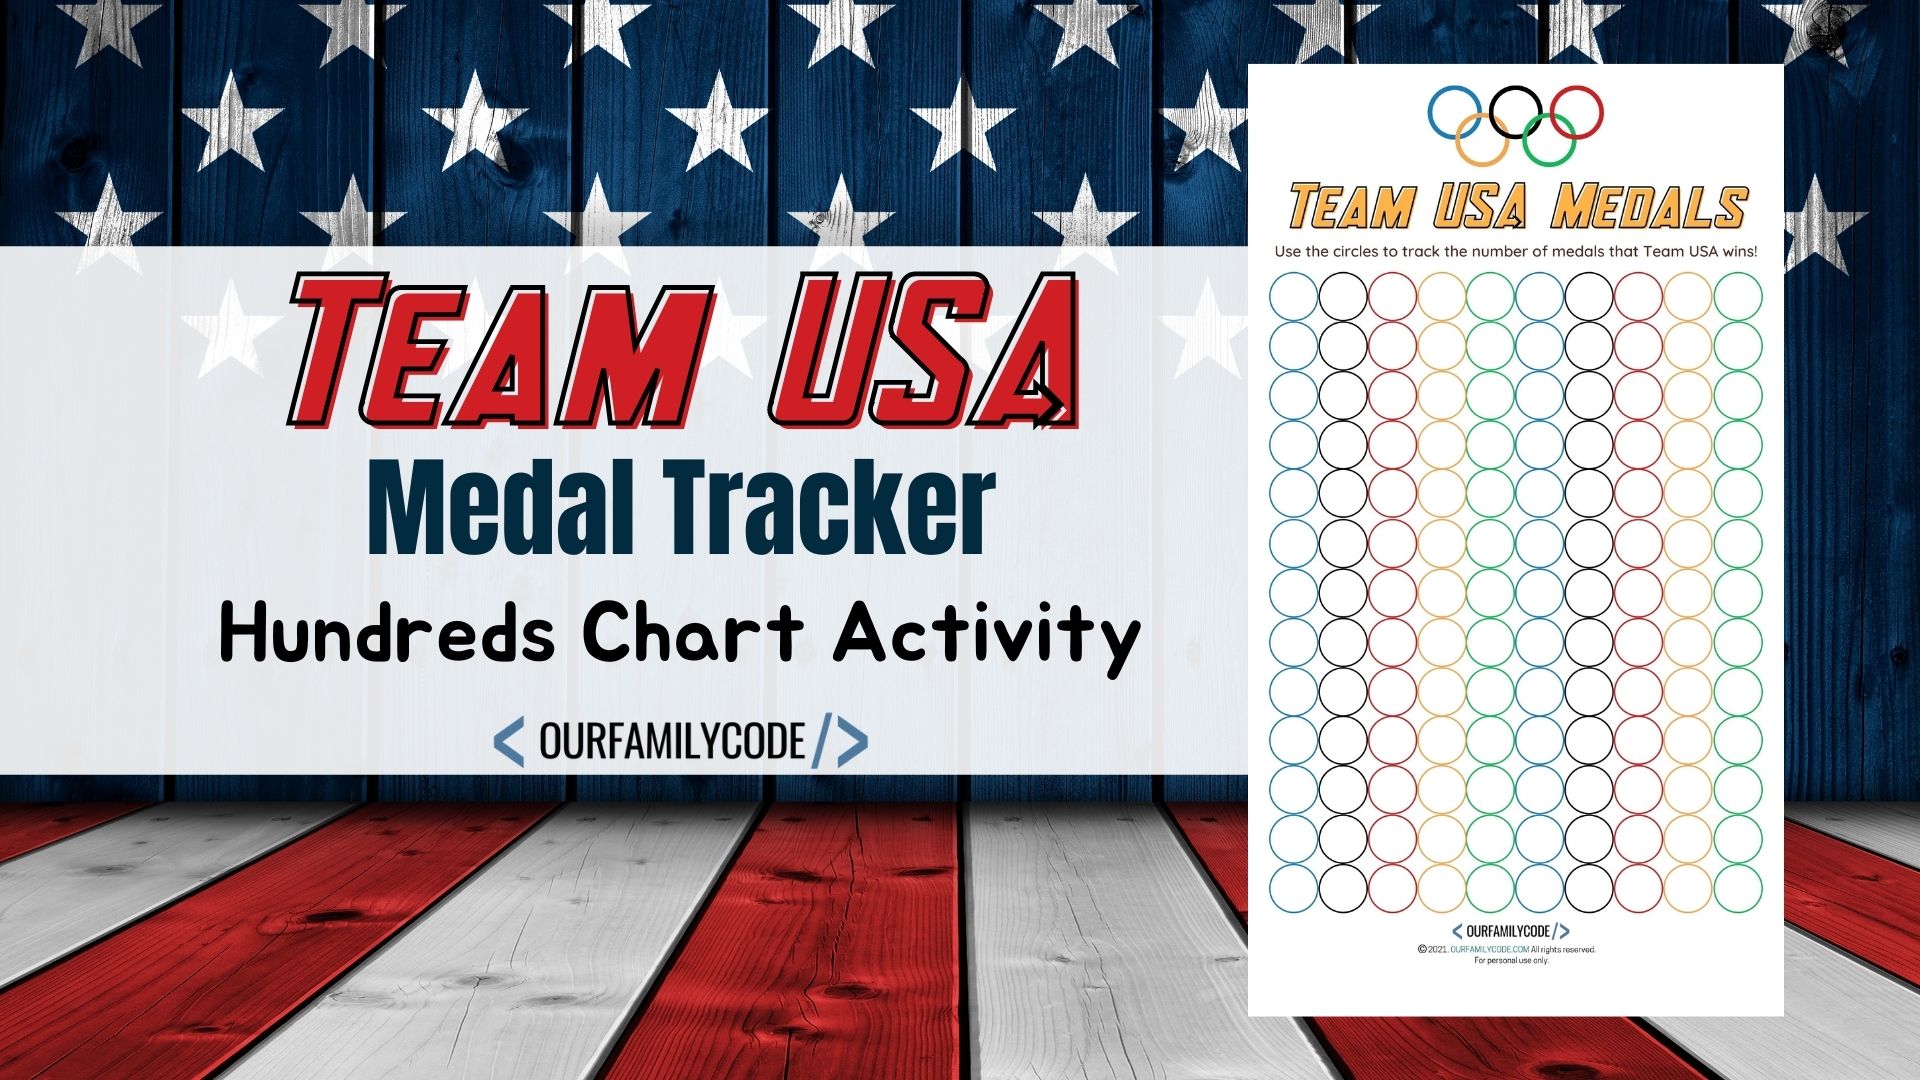 A picture of a Team USA medal tracker hundreds chart activity on a red white blue background.